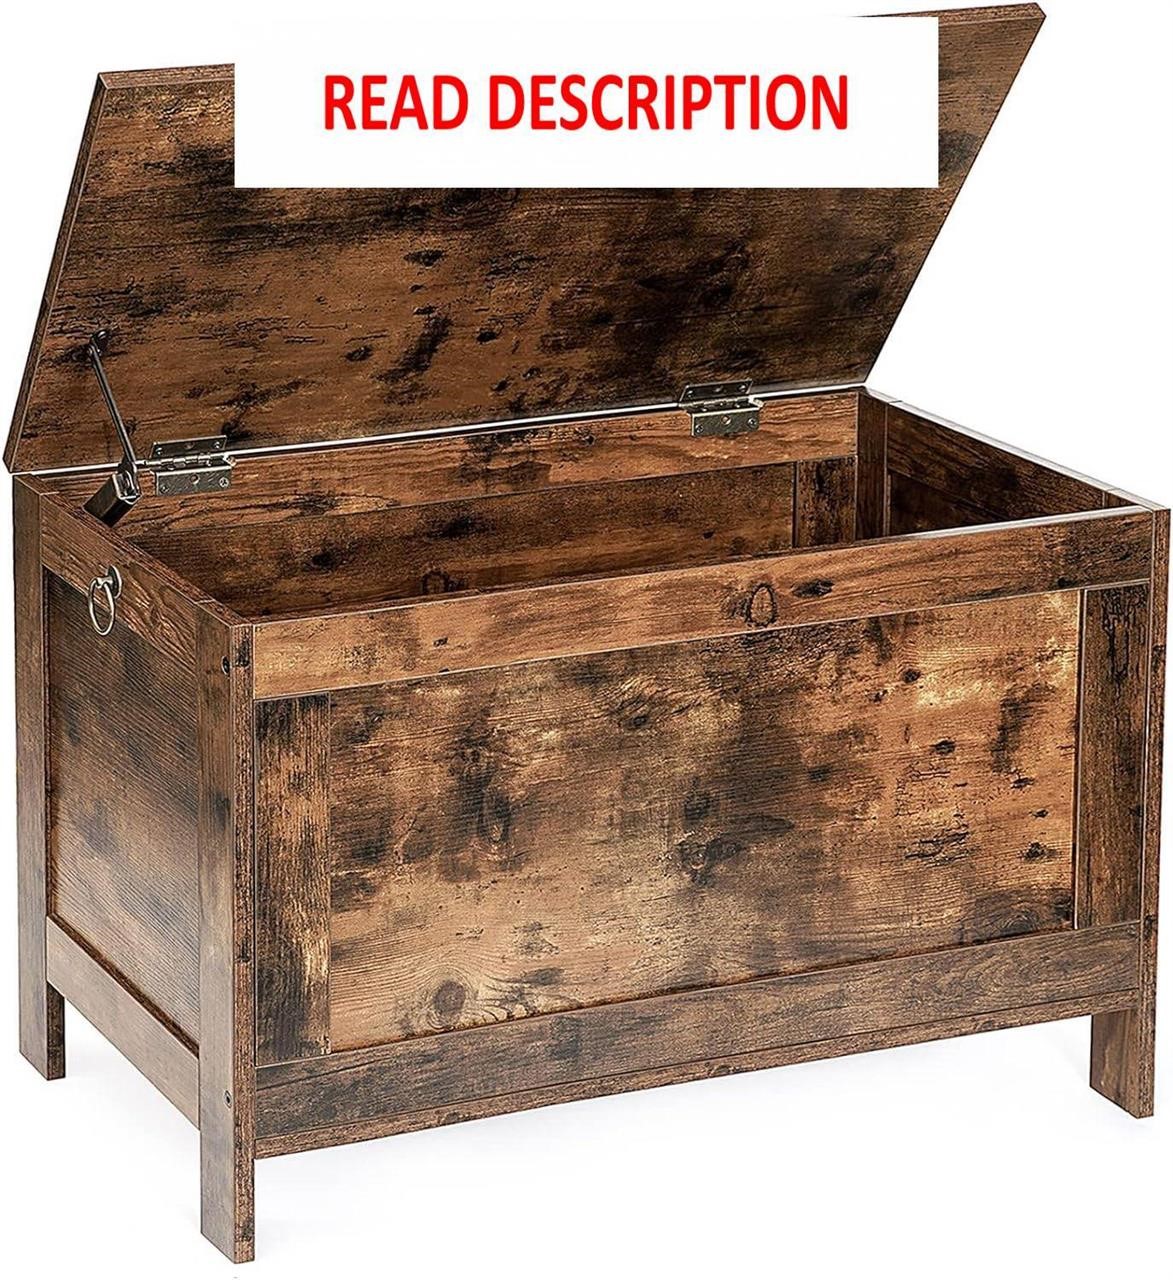 $70  Wooden Toy Box  220lb  29.9x15.7x18.9in